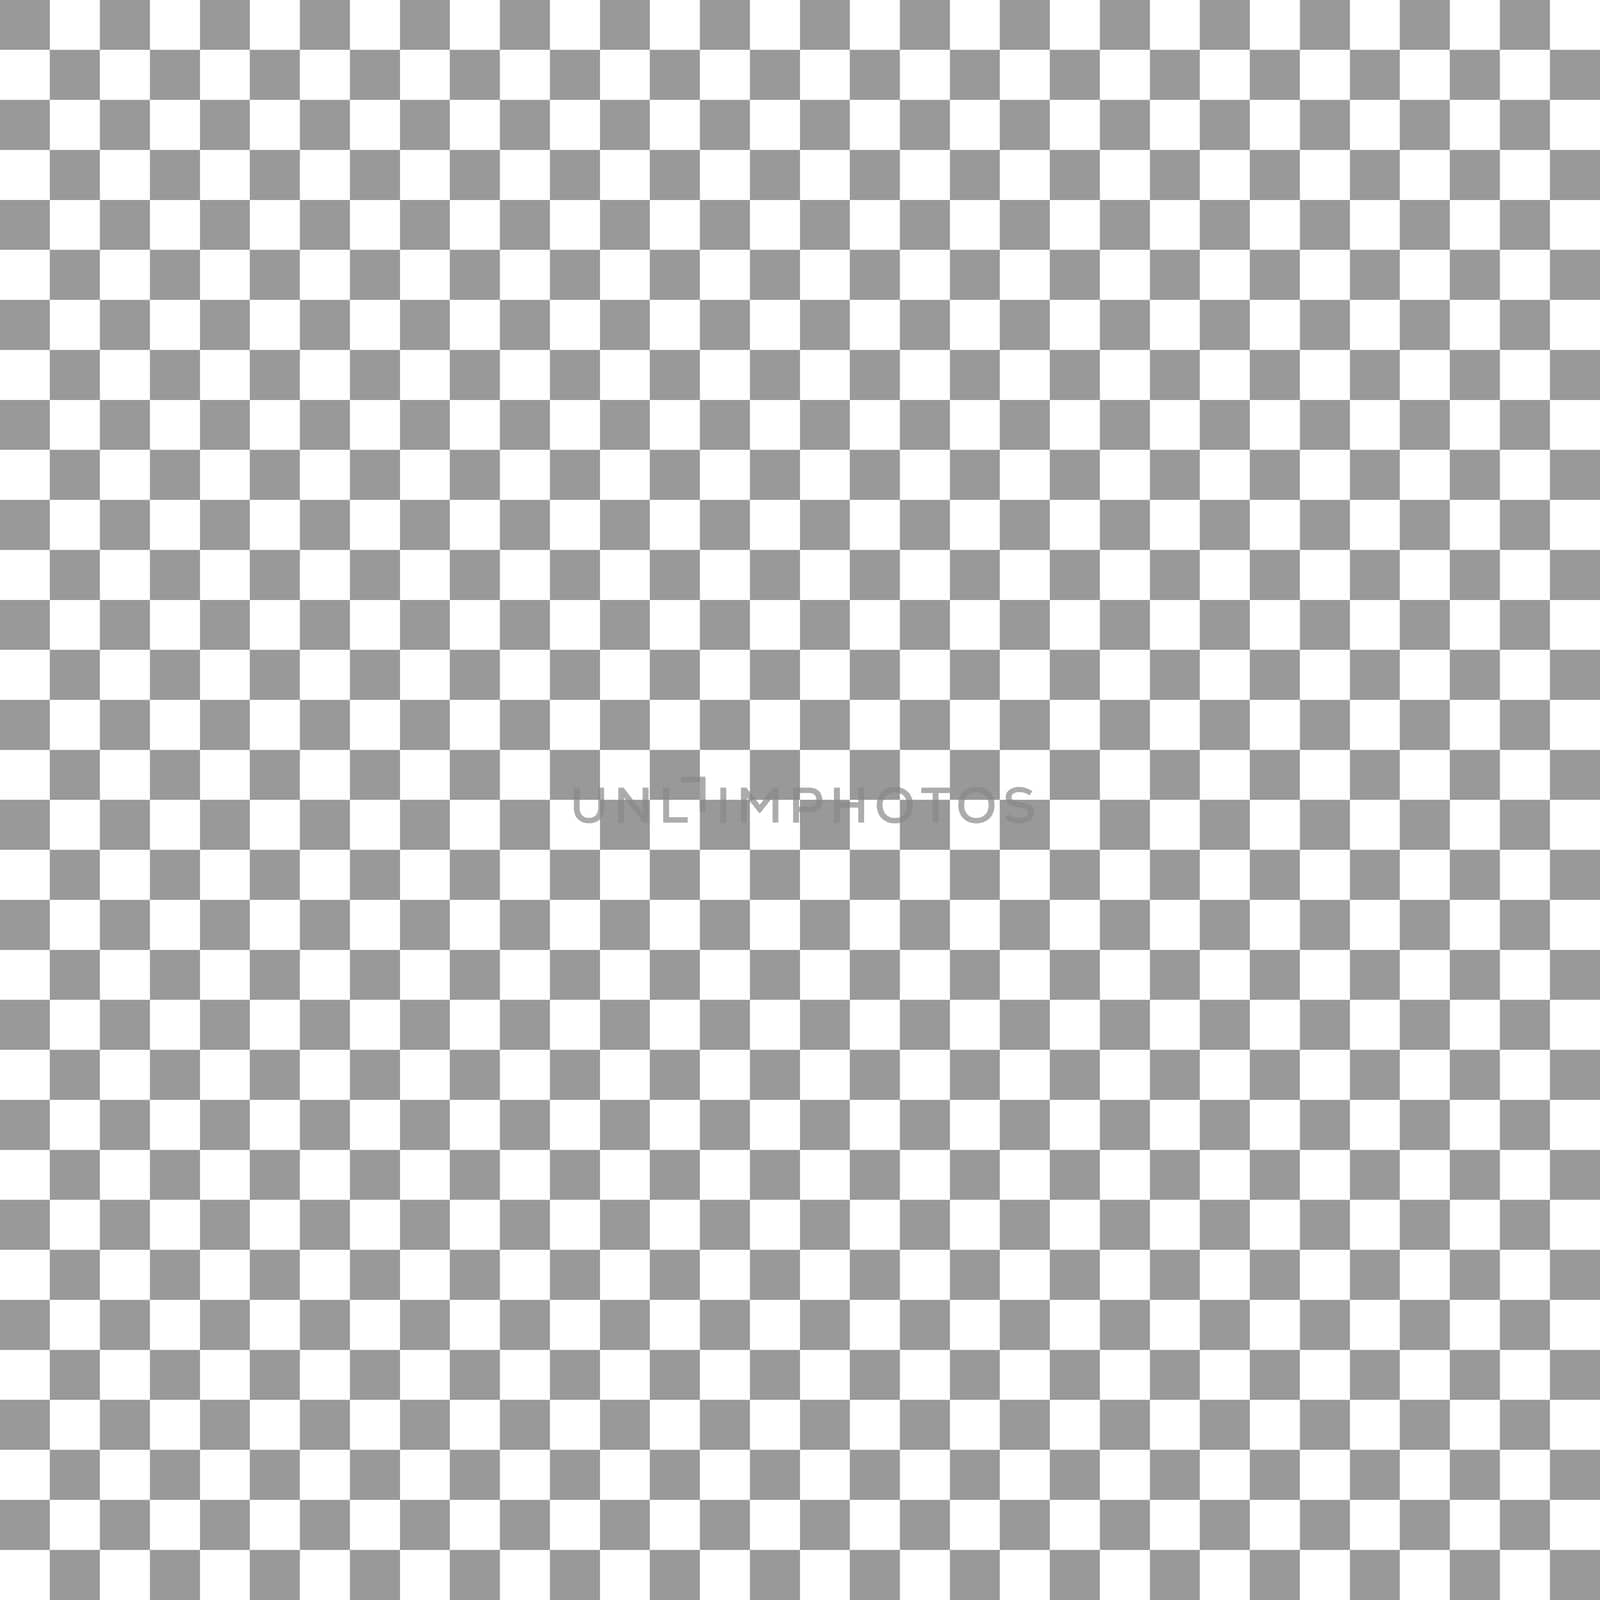 checkered gray and white illustration useful as a background by claudiodivizia